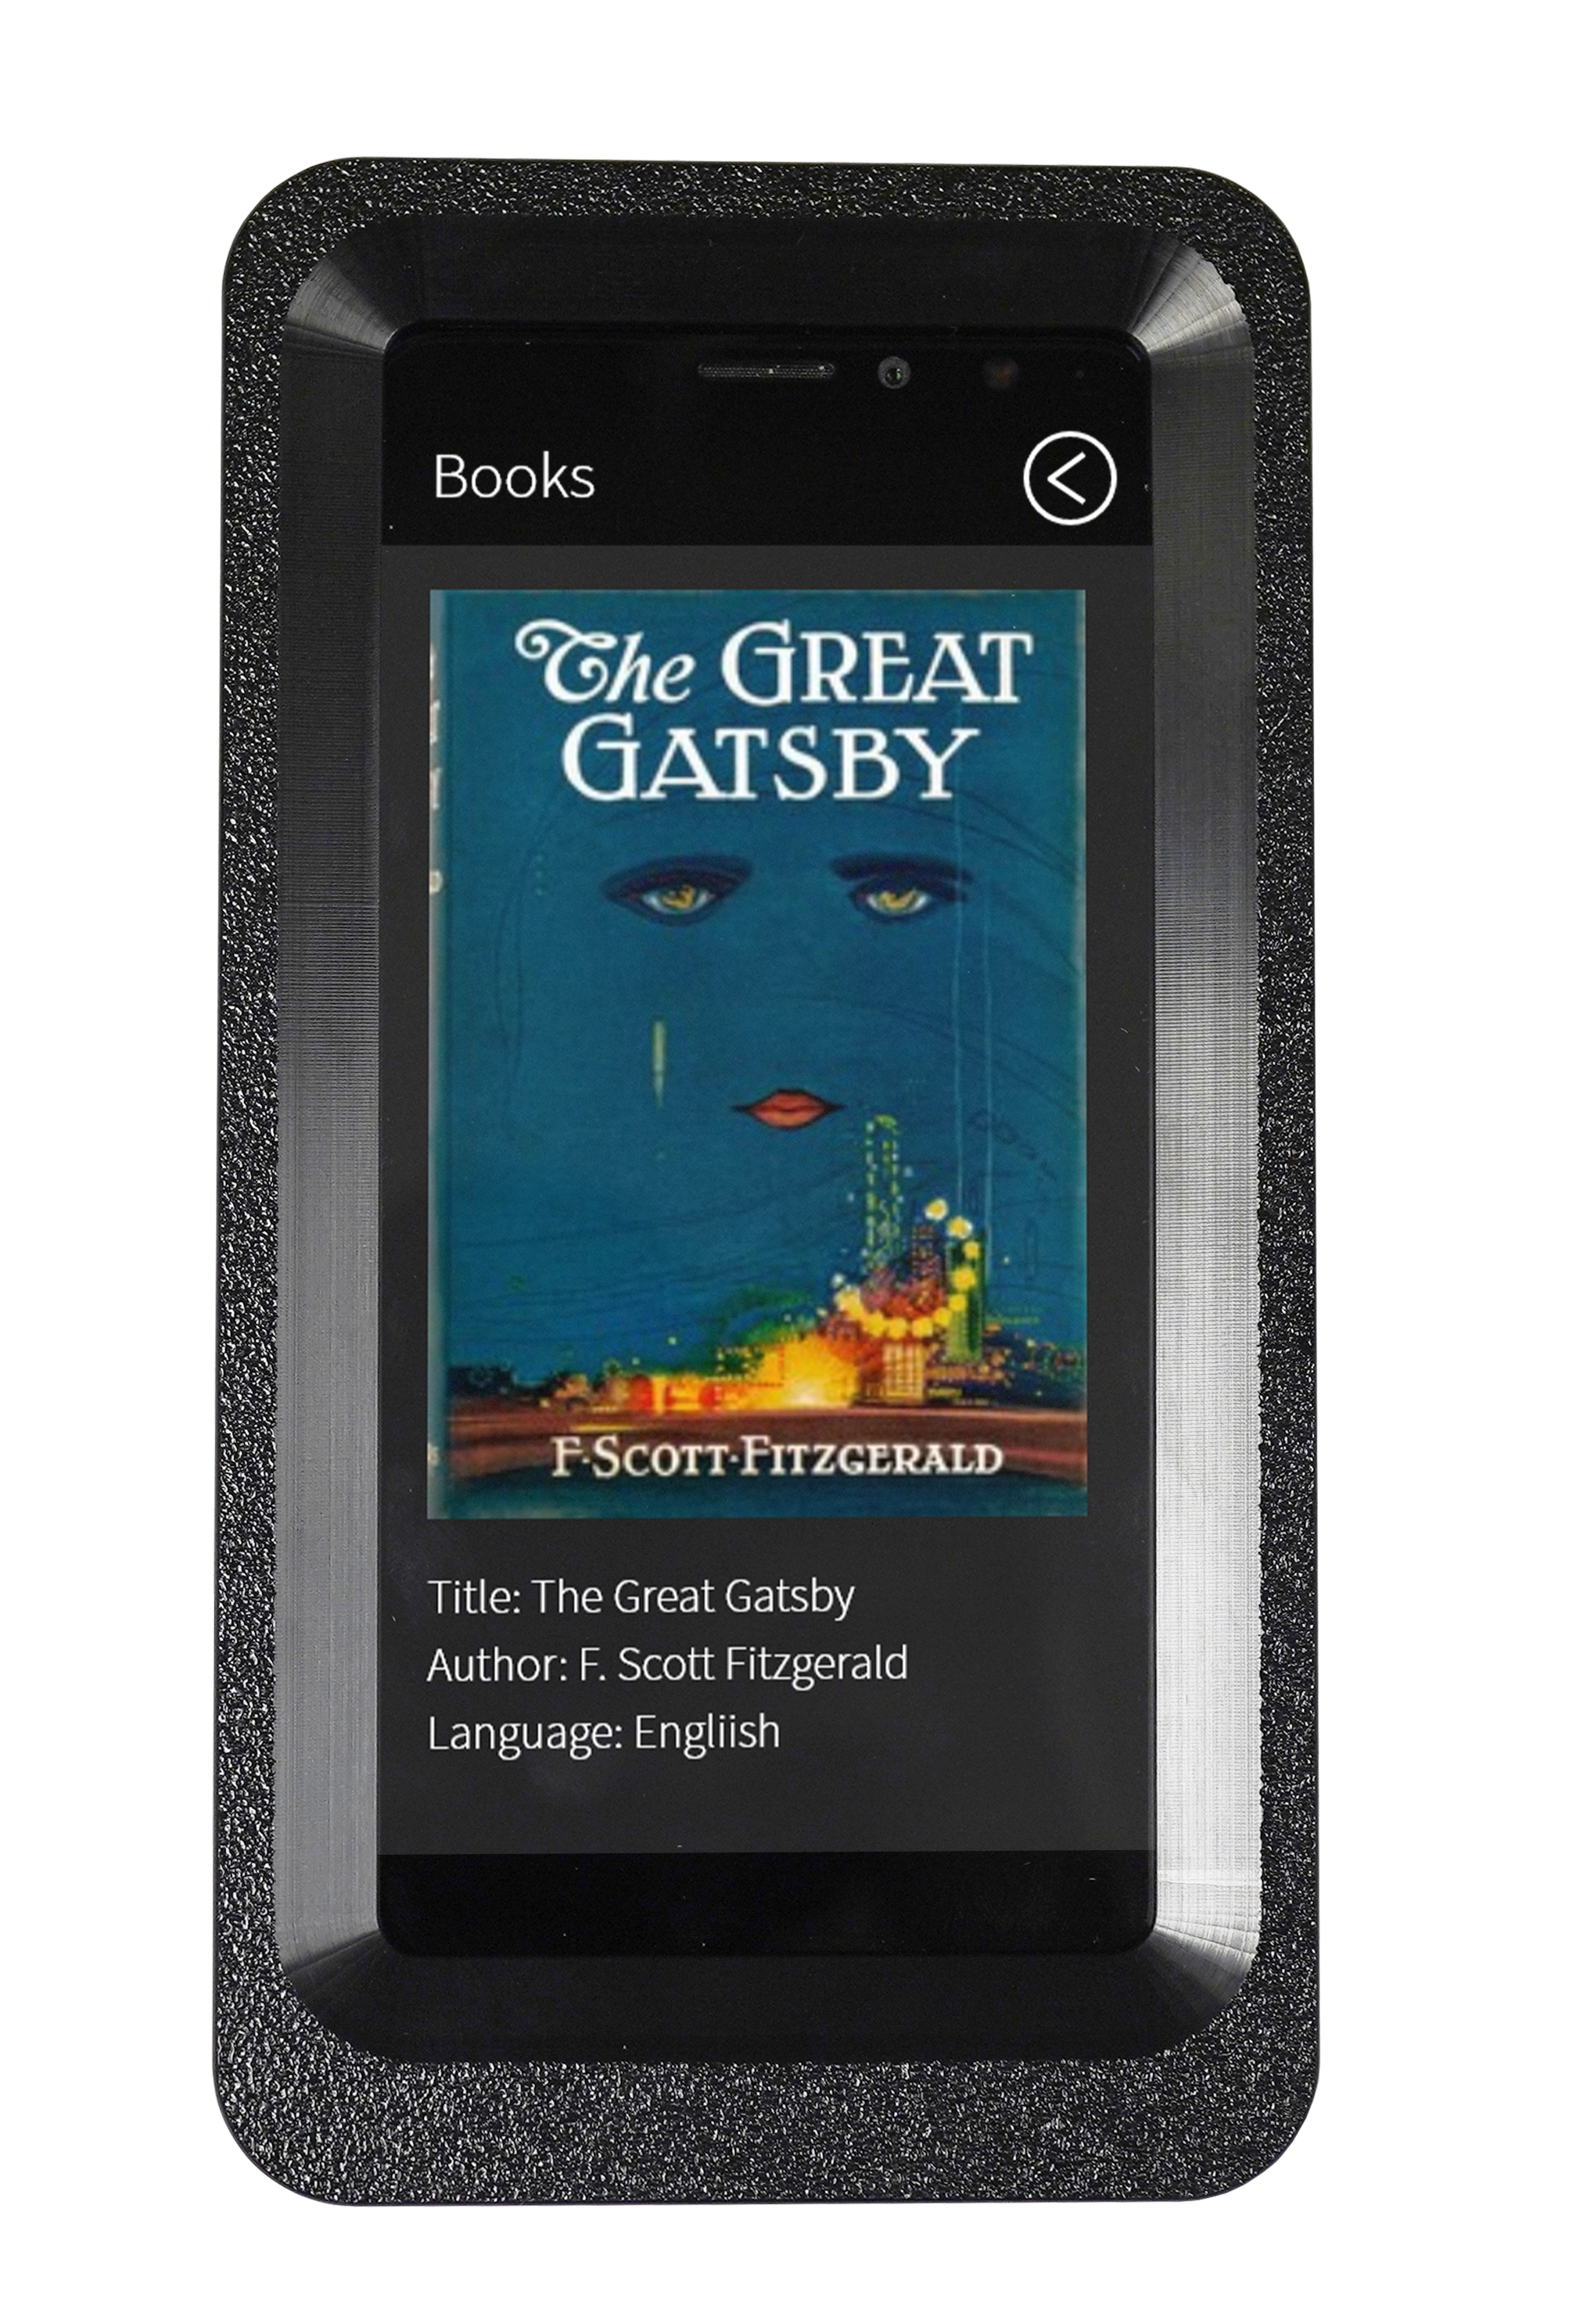 Cidnet Tablet with books app open